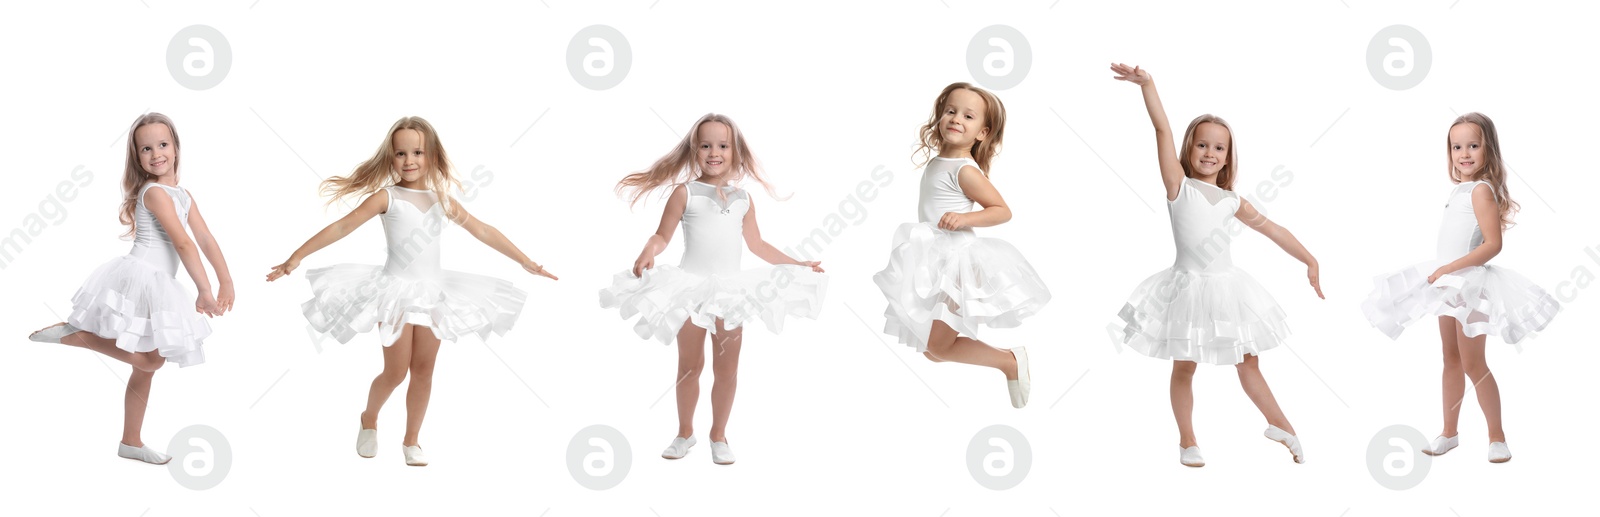 Image of Cute little girl dancing and jumping on white background, set of photos